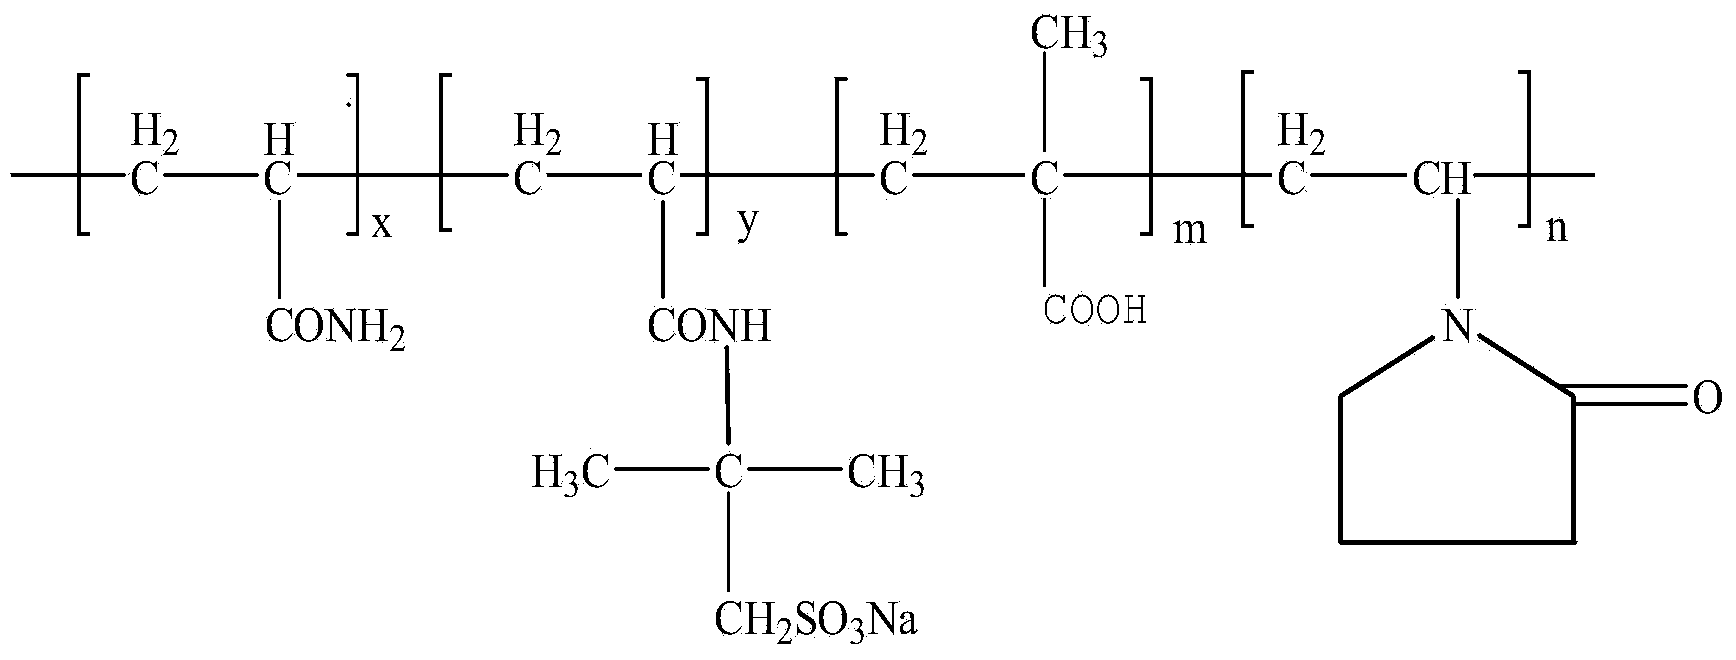 Modified acrylamide polymer fracturing fluid